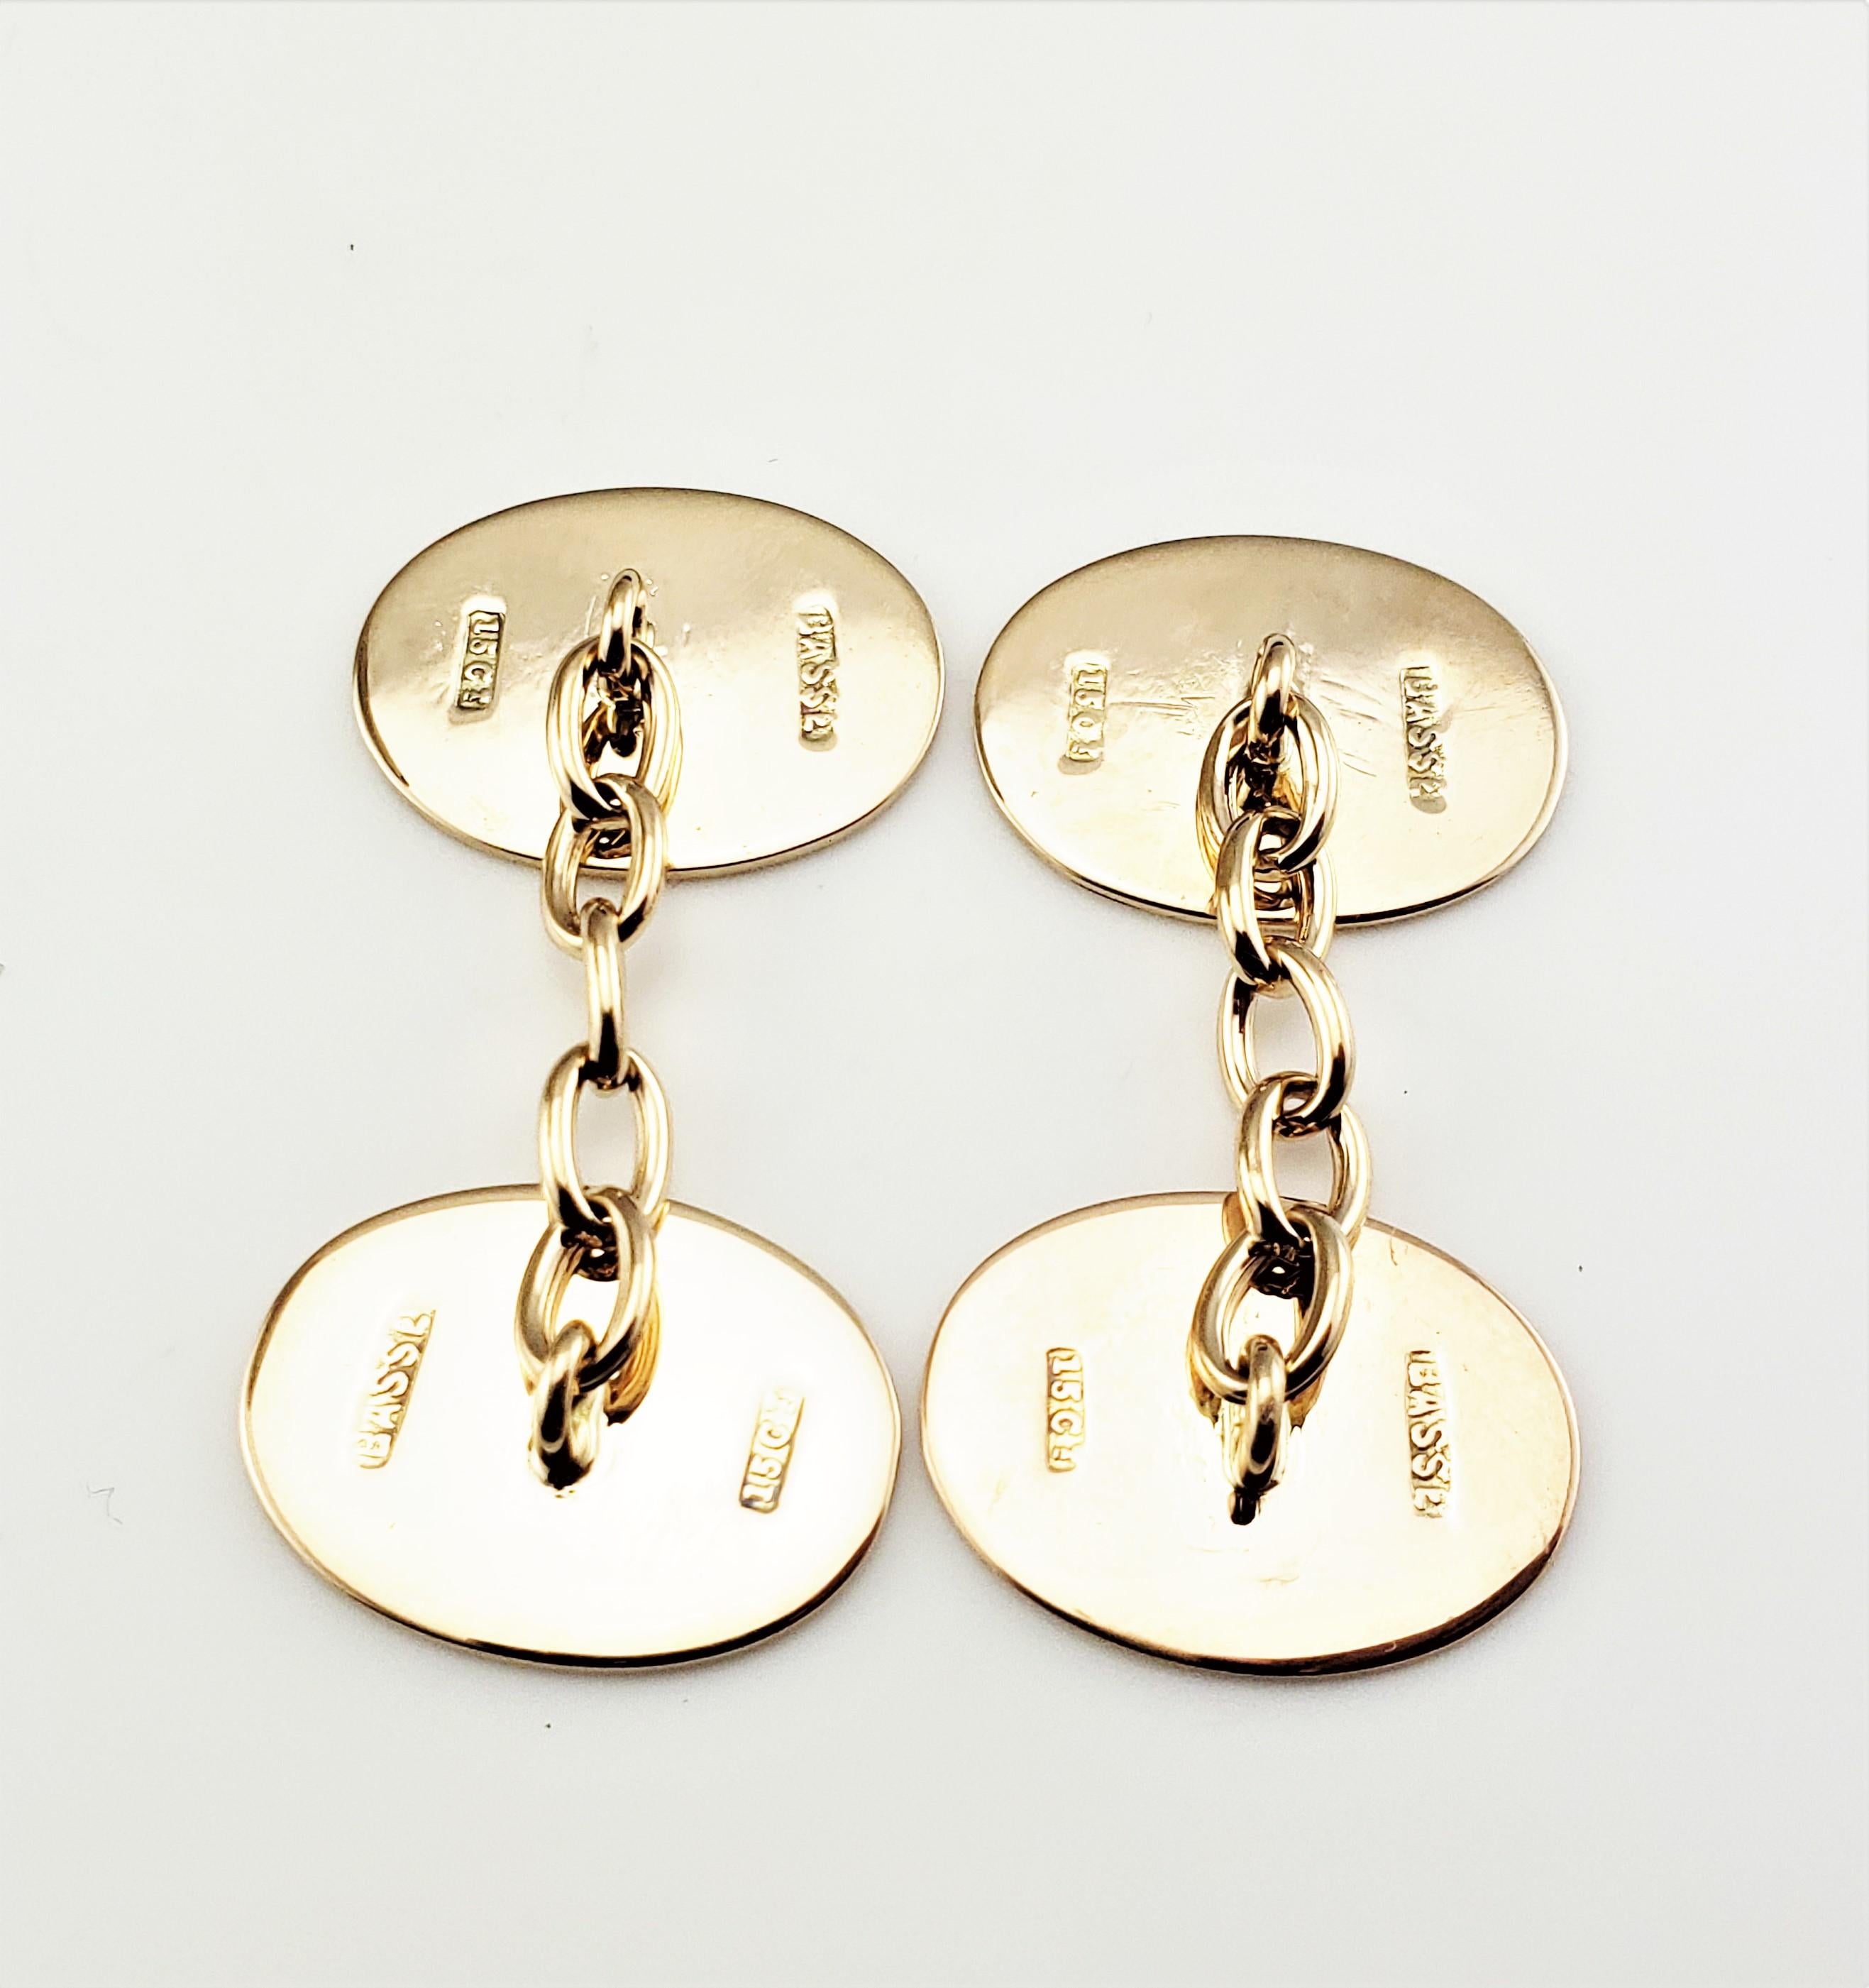 15 Karat Yellow Gold Cuff Links In Good Condition For Sale In Washington Depot, CT